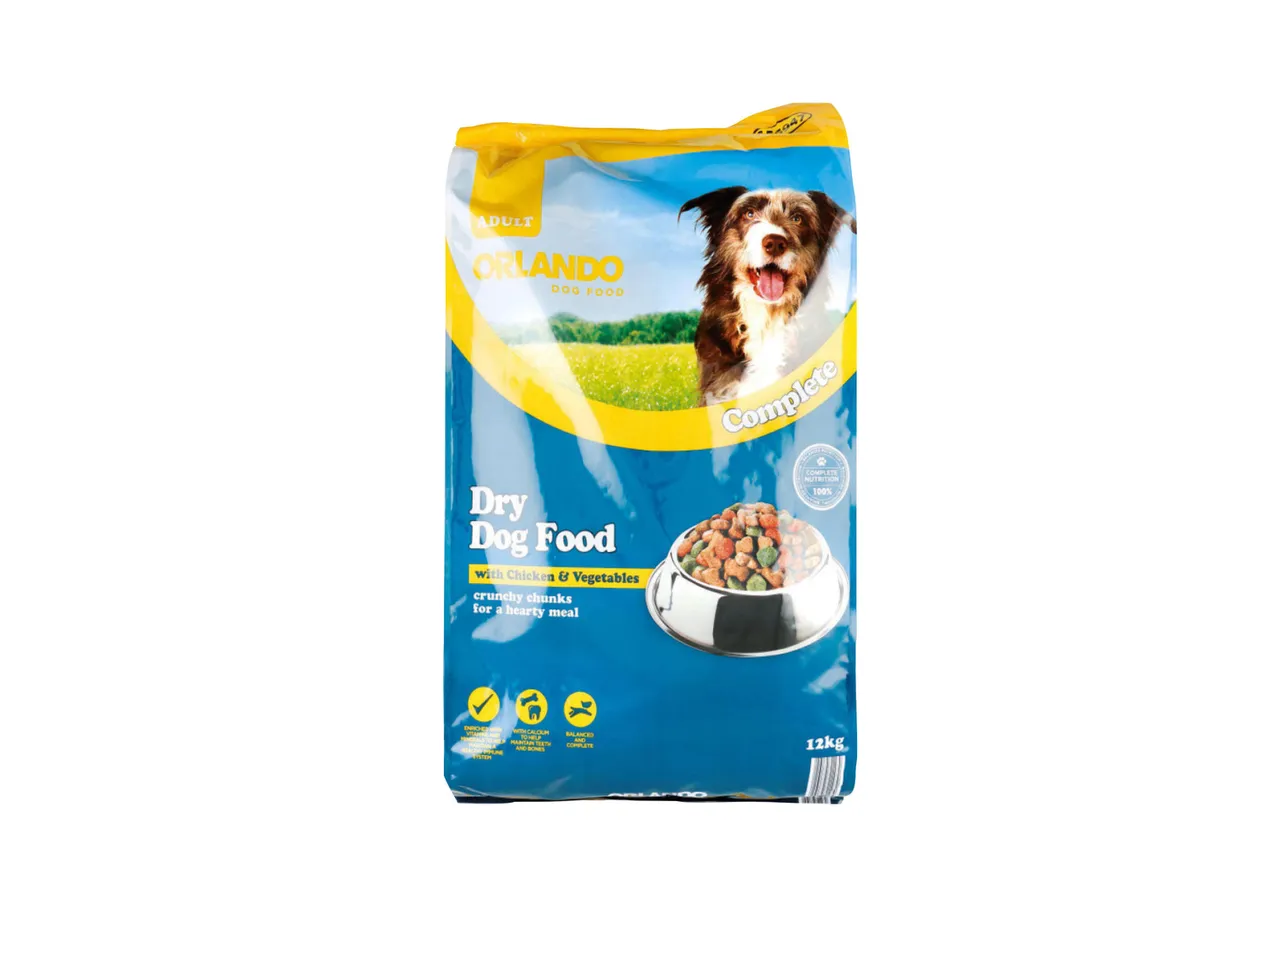 Go to full screen view: Dry Dog Food w Chicken/Beef & Veg. - Image 1